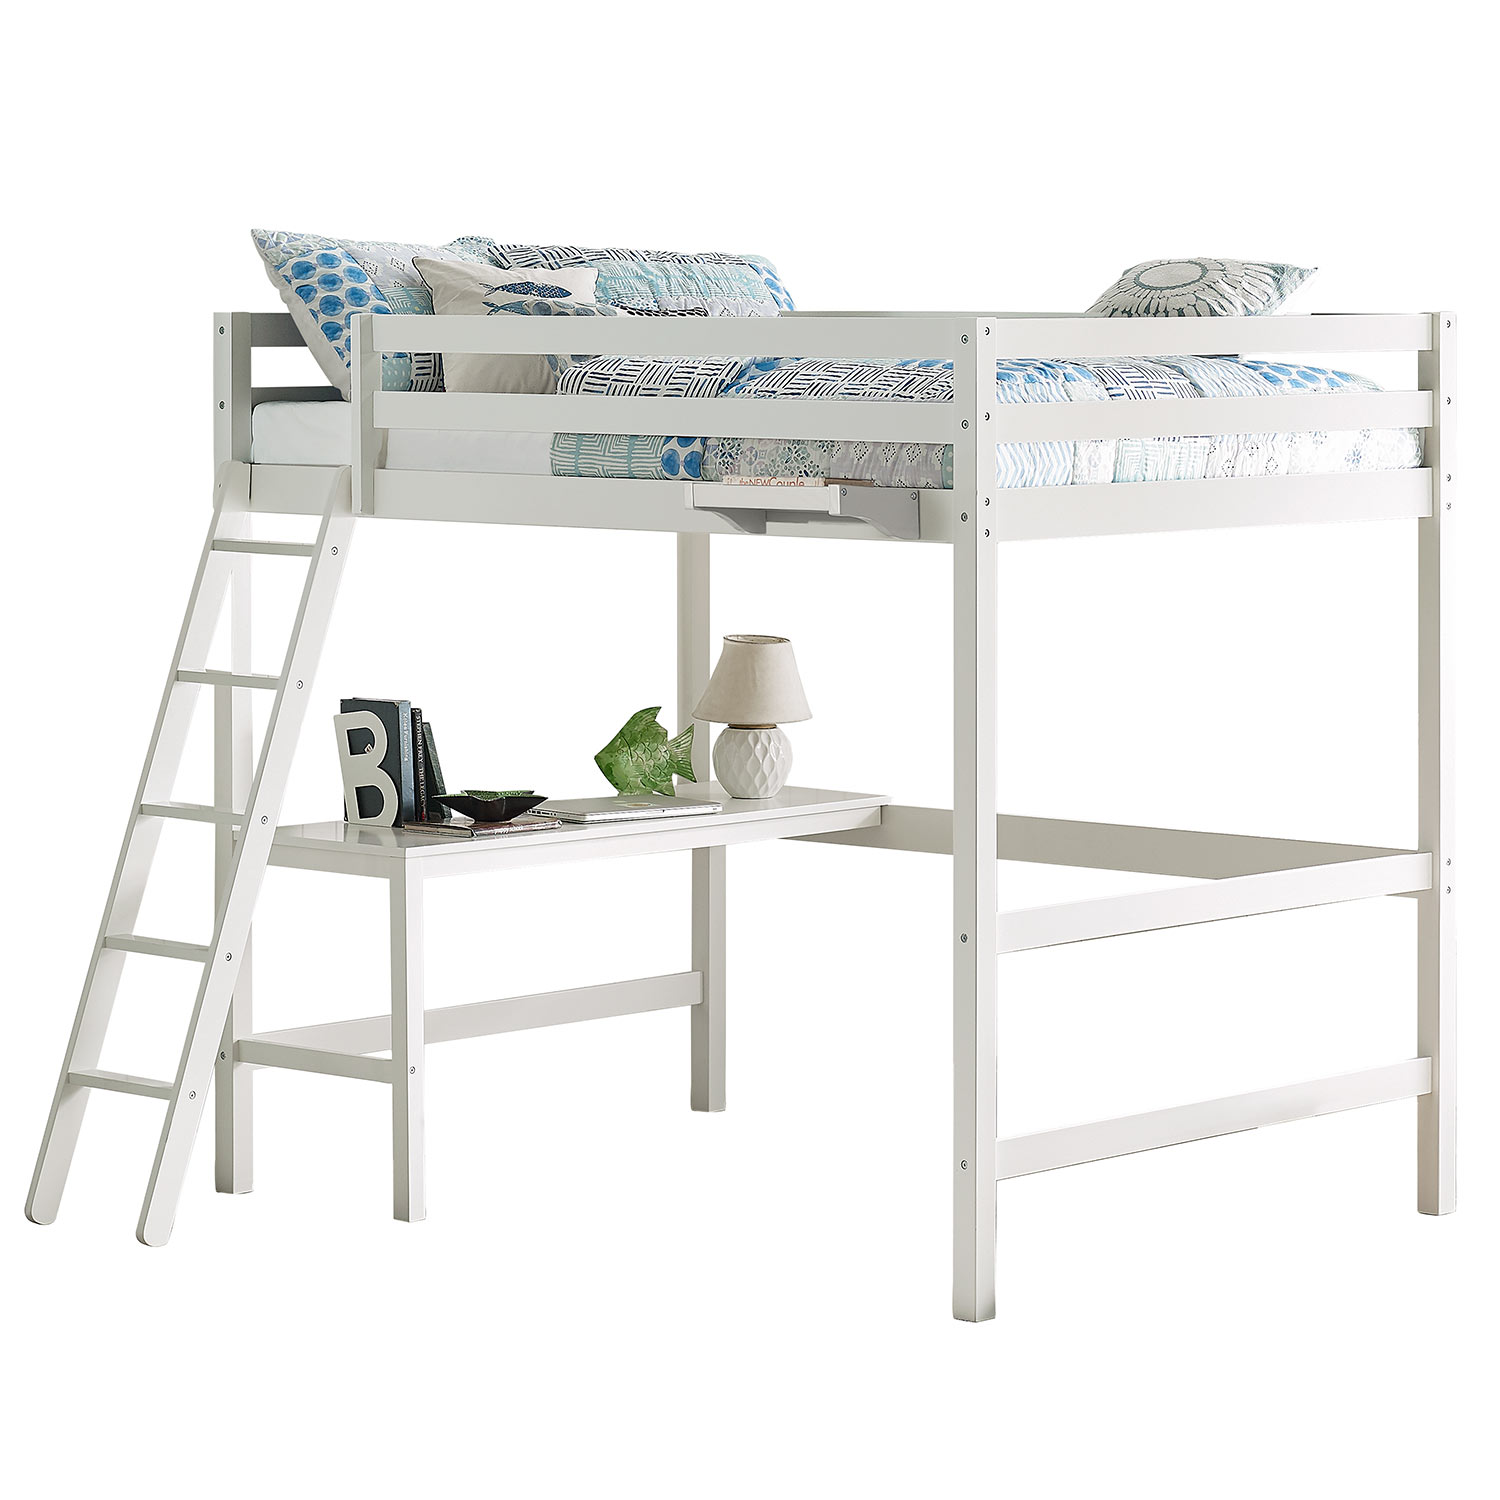 Hillsdale Caspian Full Loft Bed with Hanging Nightstand - White